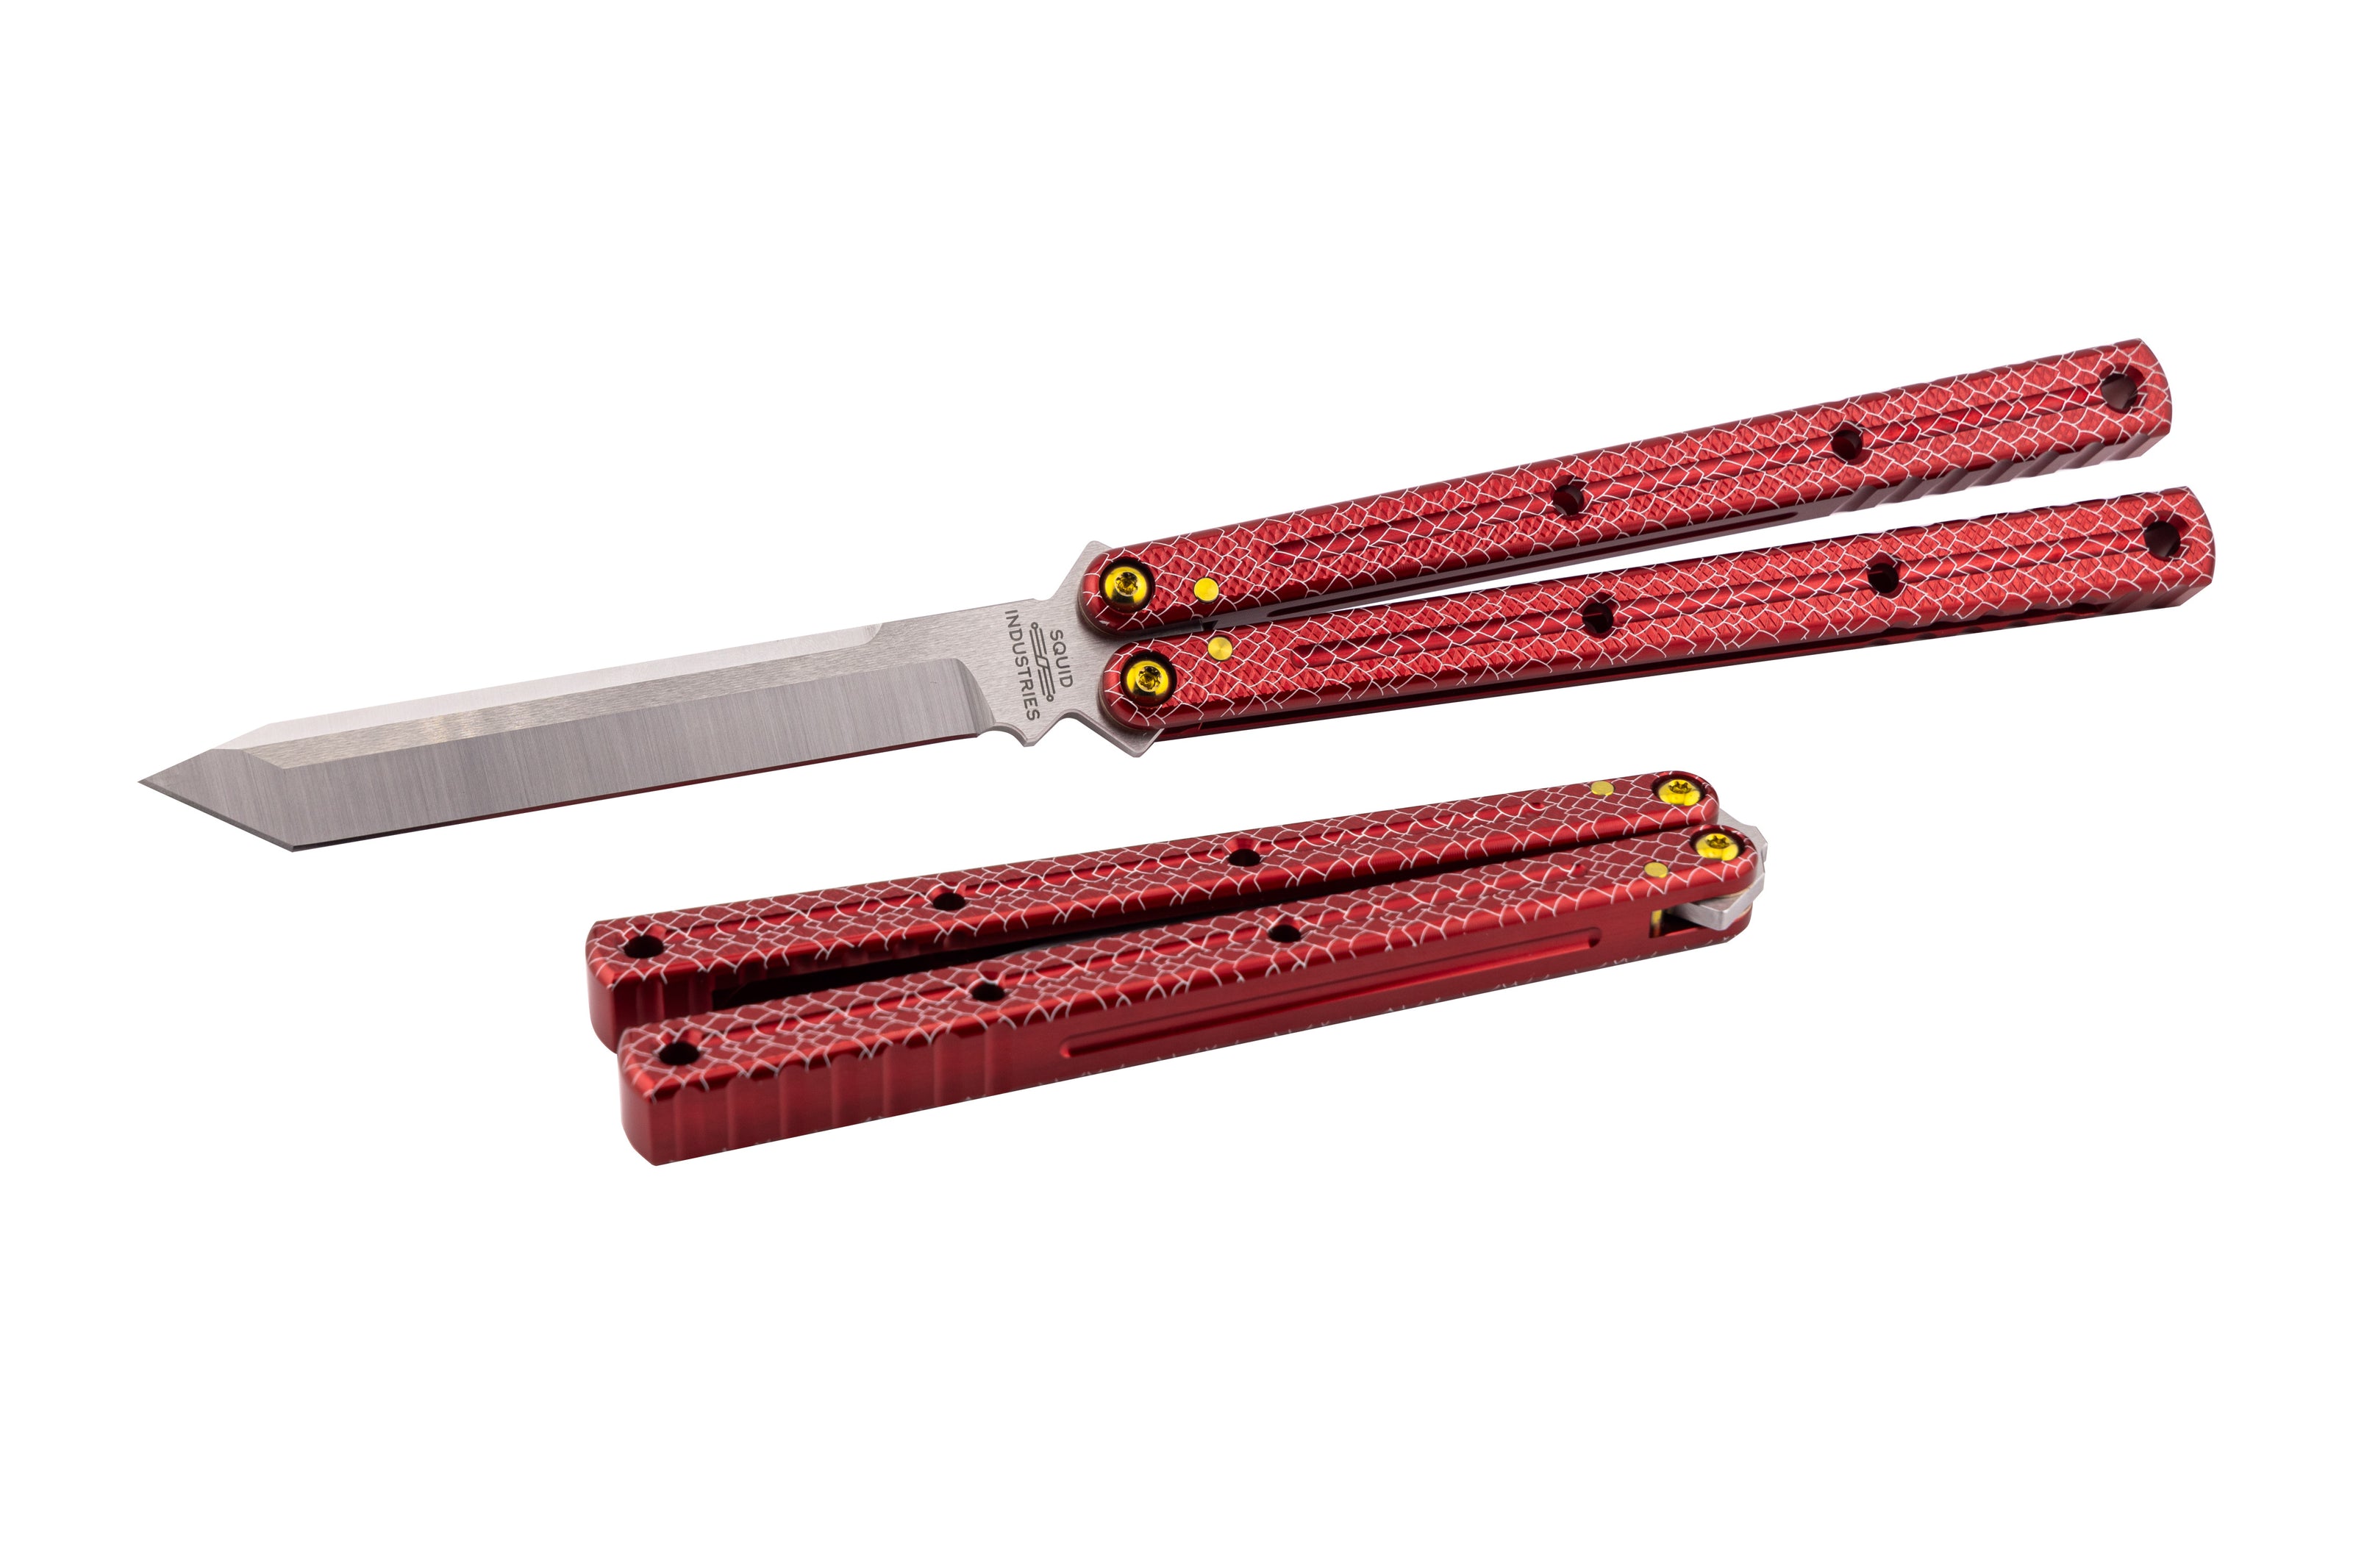 lunar new year krake raken tanto v3 live blade balisong butterfly knife open and closed